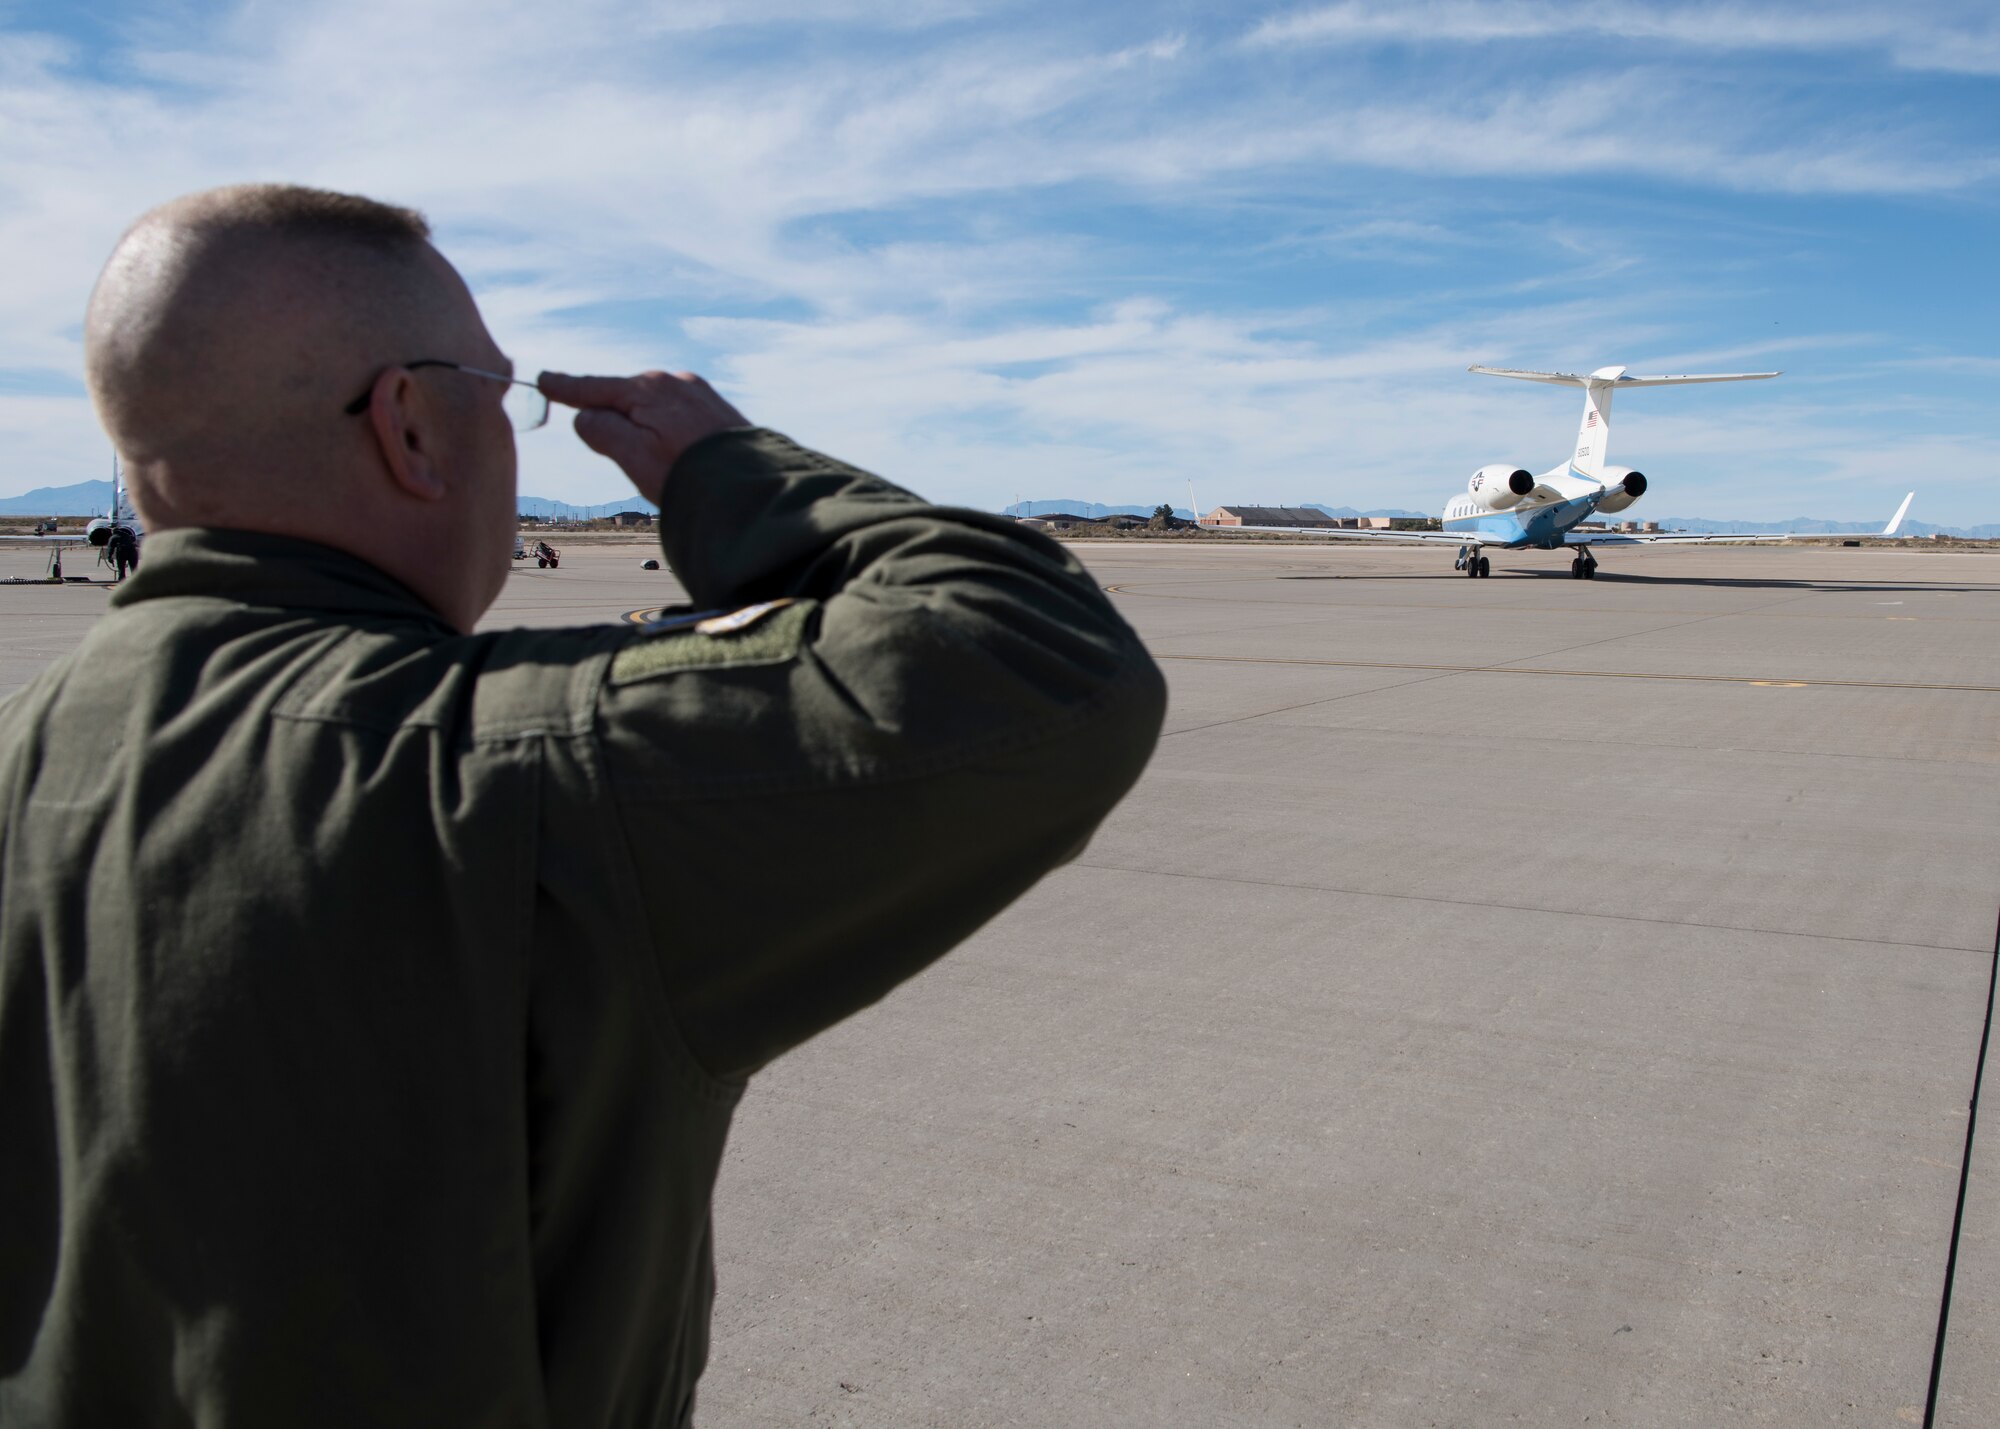 Col. Michael Boger, 54th Fighter Group commander salutes as Gen. Paul Selva, vice chairman of the Joint Chiefs of Staff, departs Holloman Air Force Base, N.M., November 14, 2018. Selva visited Holloman and White Sands Missile Range November 13 to 14. (U.S. Air Force photo by Staff Sgt. BreeAnn Sachs).